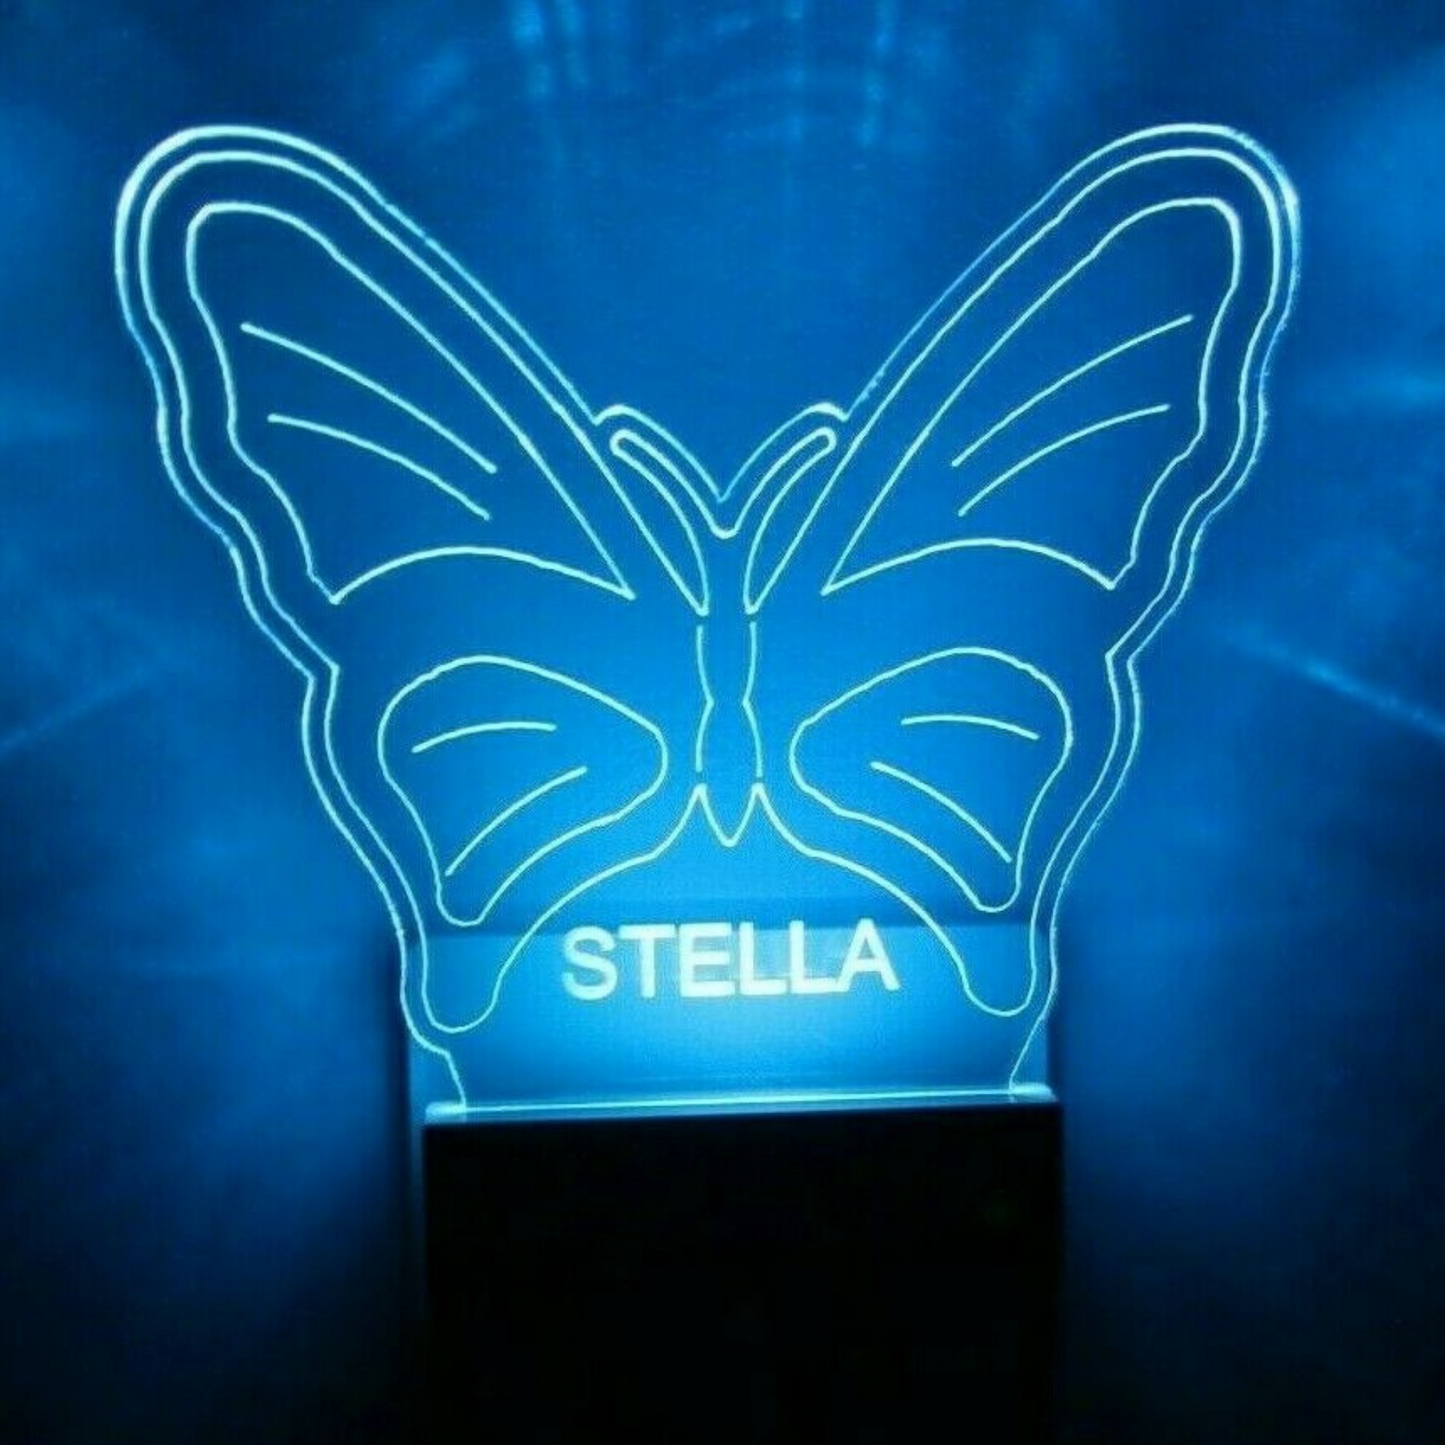 Butterfly Night Light Multi Color Personalized LED Wall Plug-in, Cool-Touch Smart Dusk to Dawn Sensor, Bedroom Hallway Bathroom